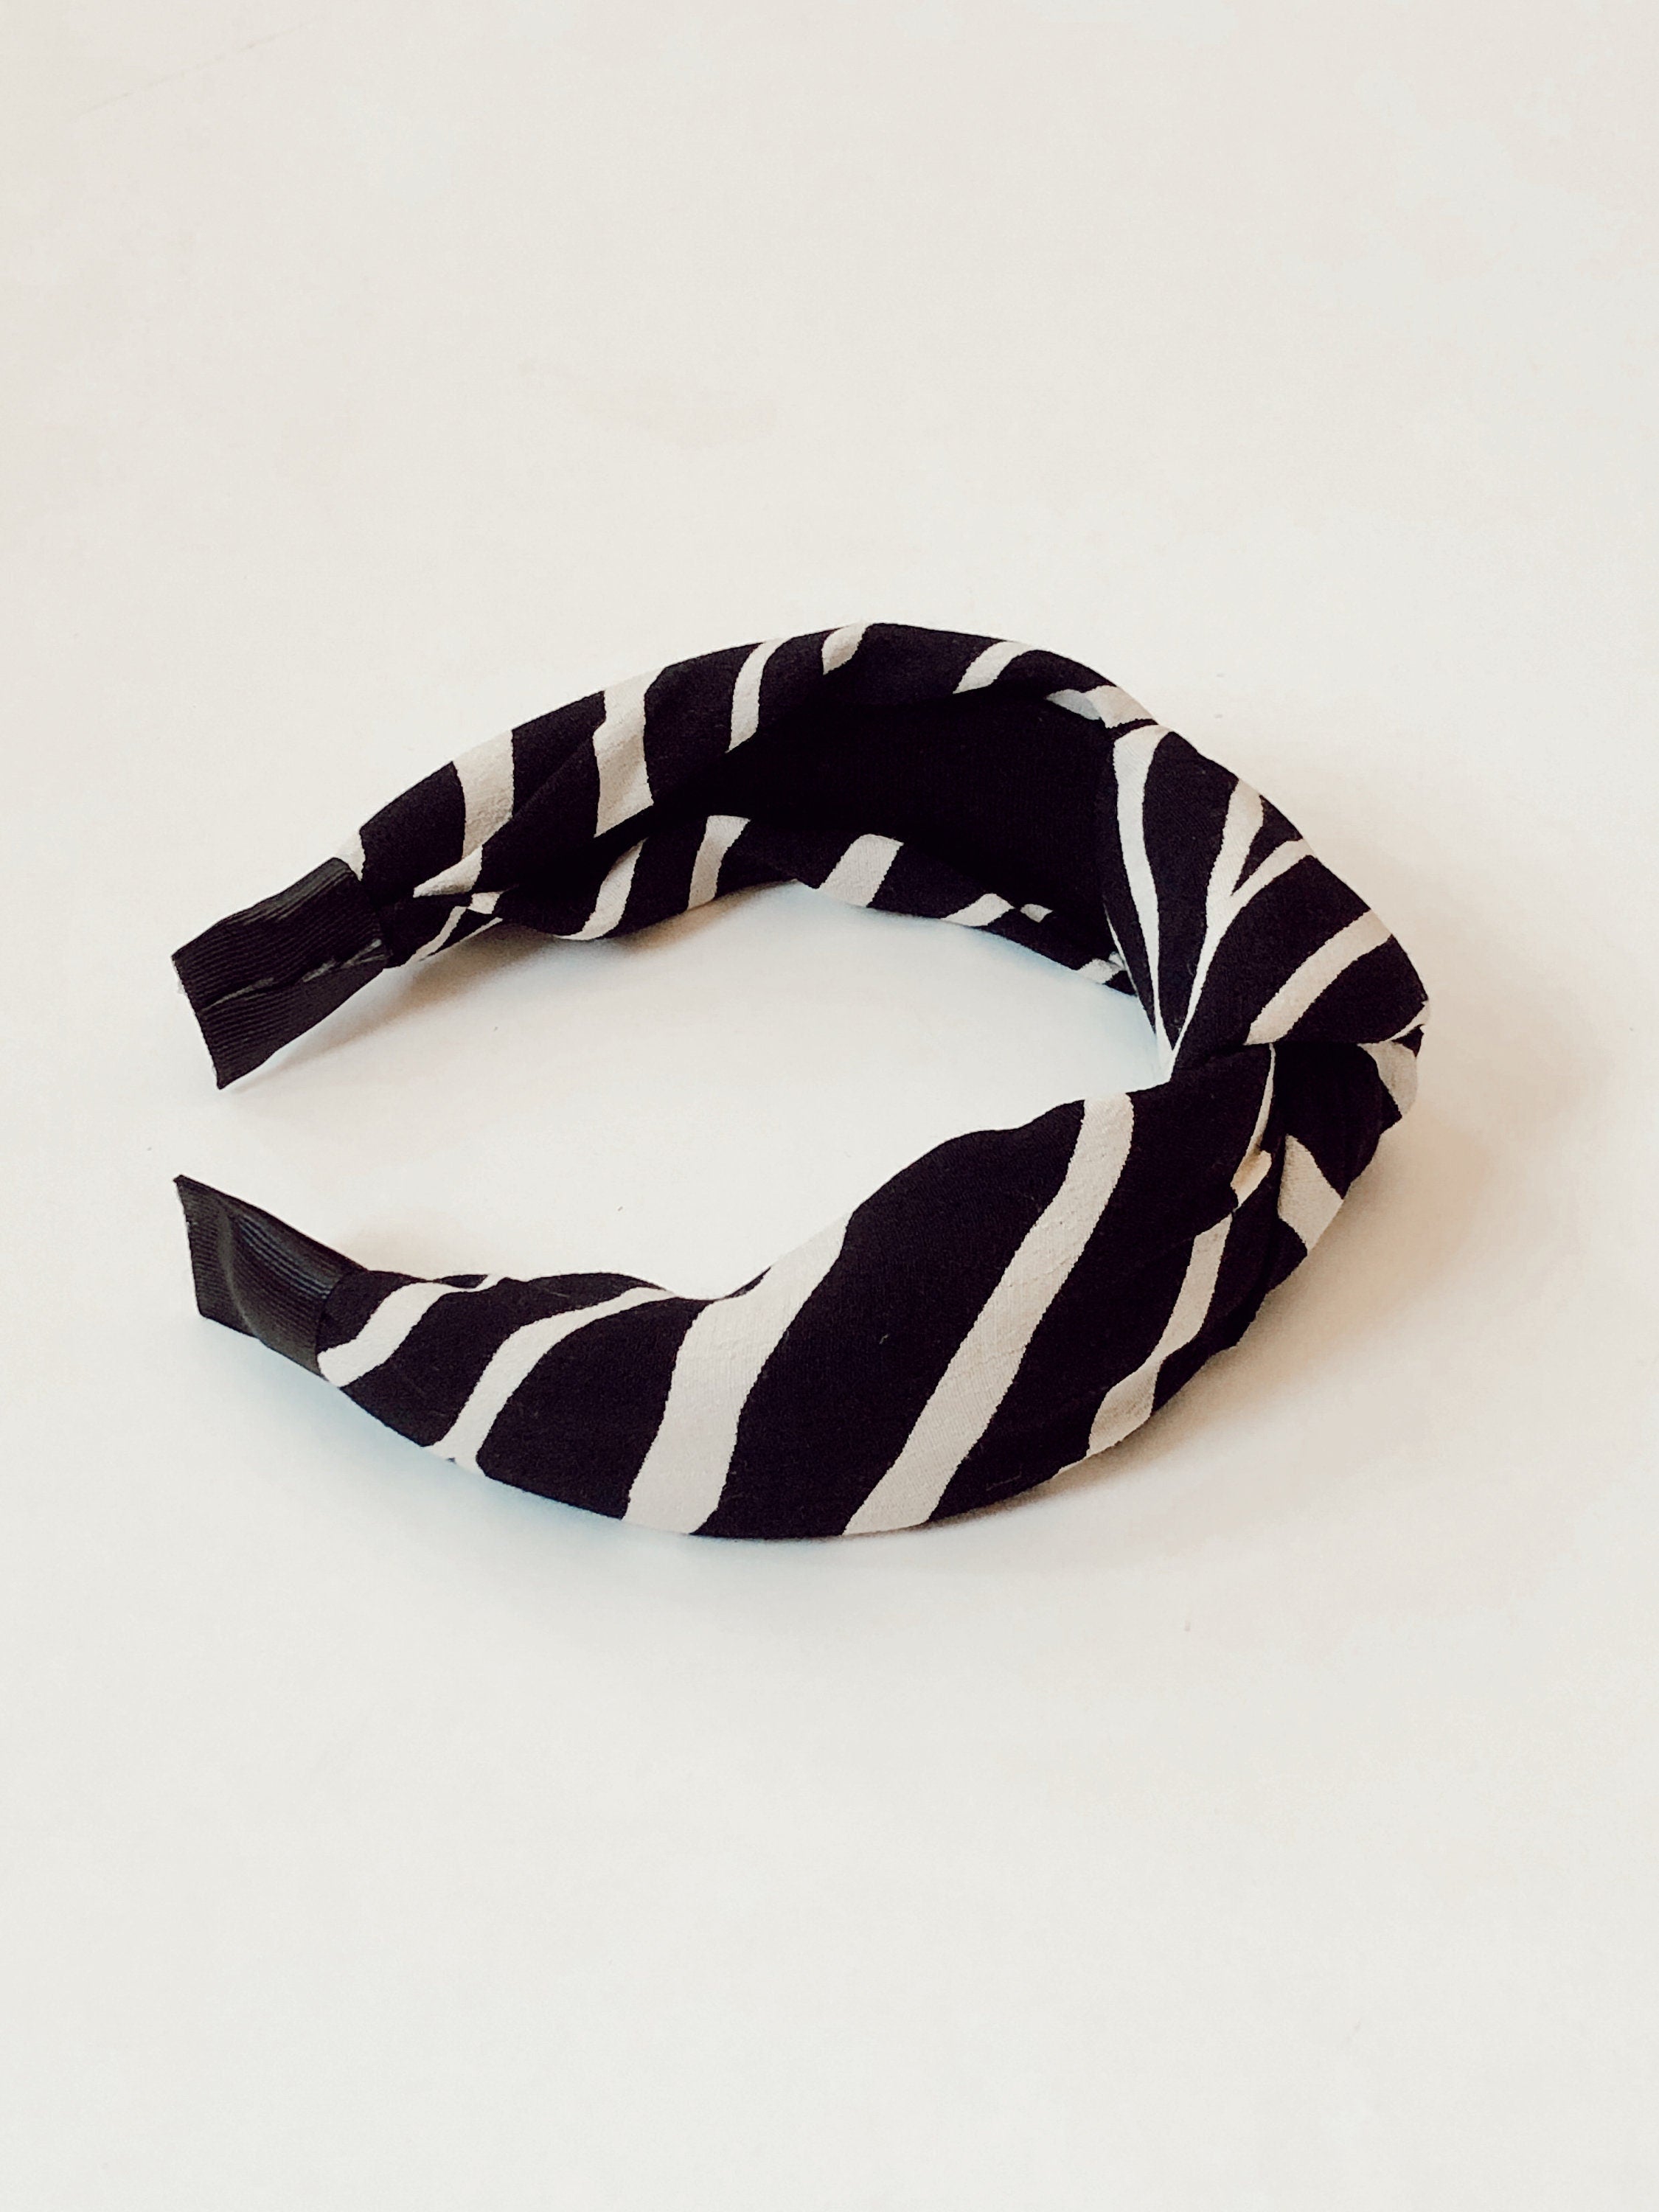 Make a statement with this fashionable knotted headband, featuring a zebra pattern and a classic off-white and black color scheme.